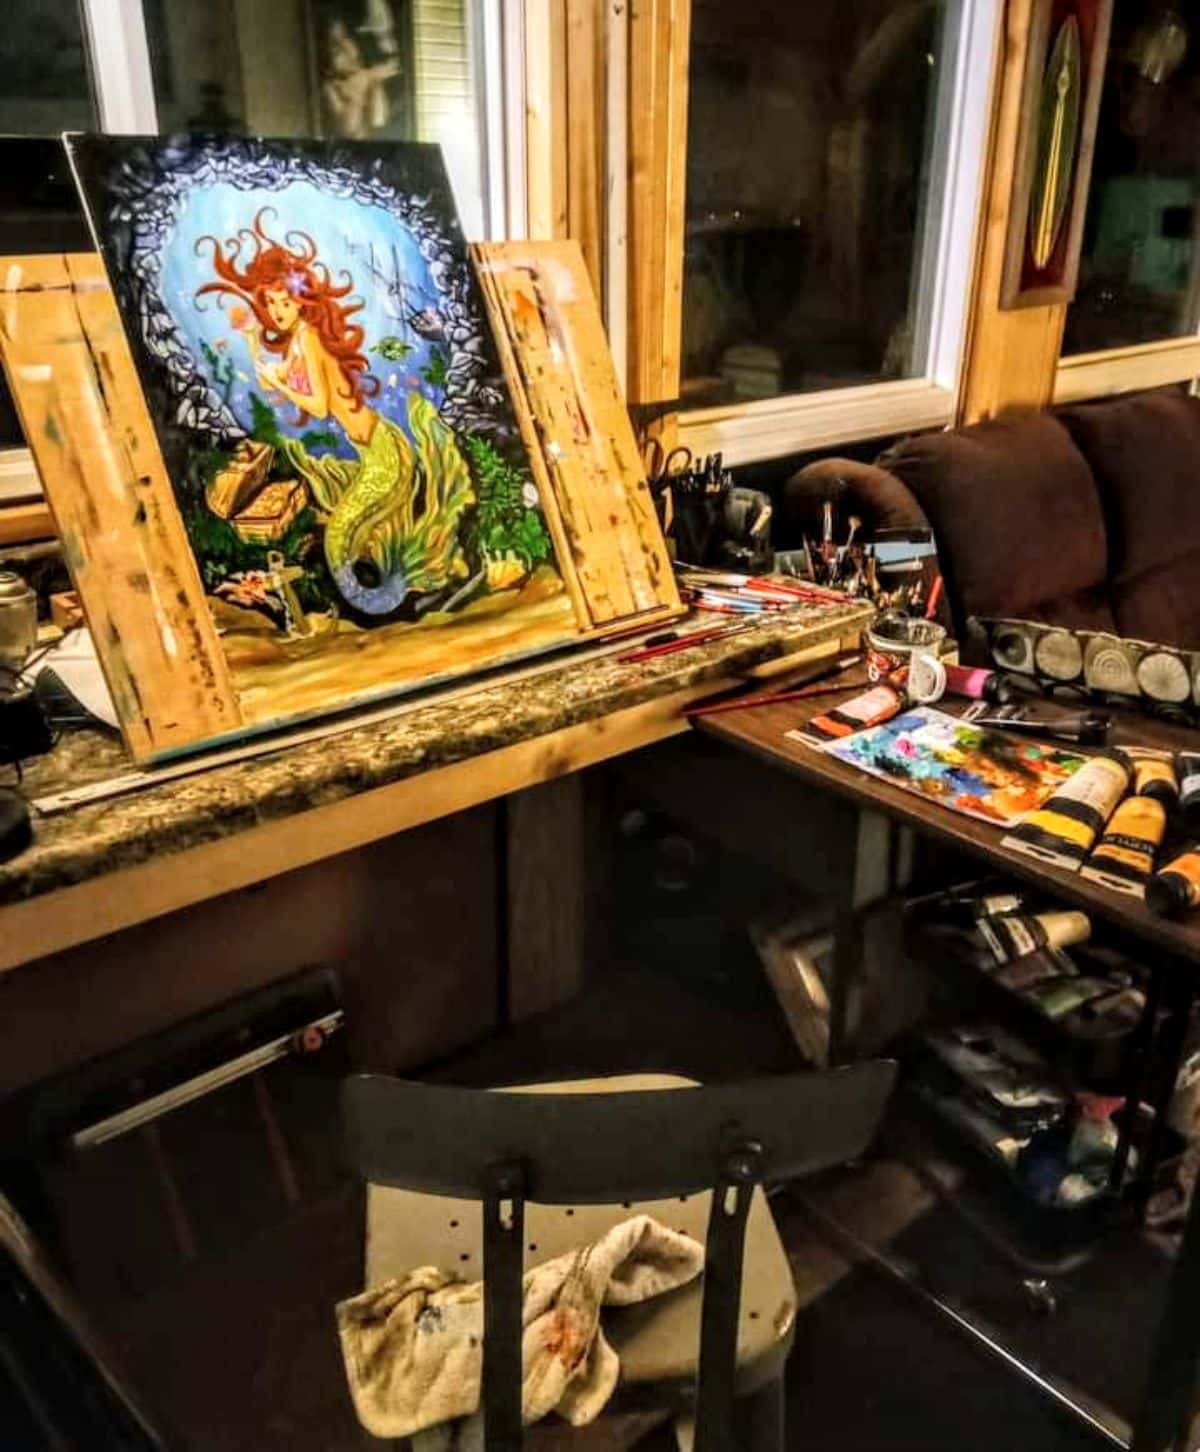 Ray’s Cabin Off-the-Grid Tiny House indoor with a mermaid painting.